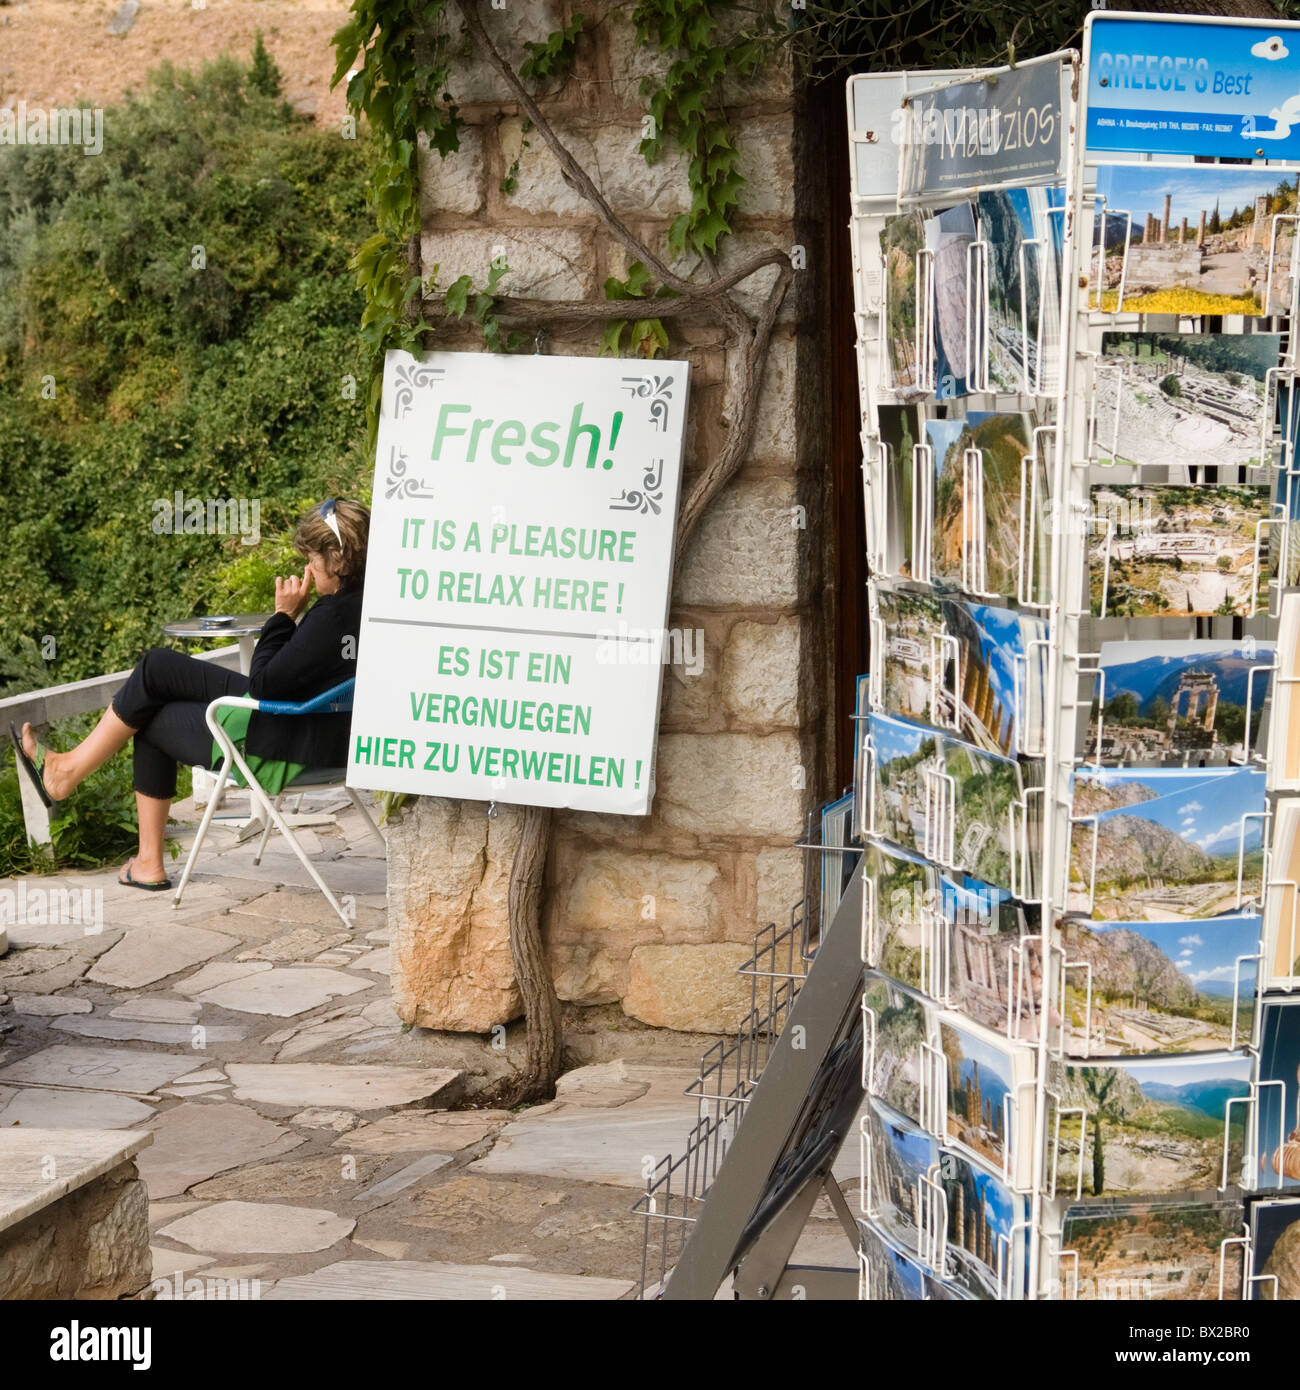 A woman picking her nose next to a sign saying 'Fresh! - It is a pleassure to relax here!' at a cafe in Delphi Greece. Stock Photo